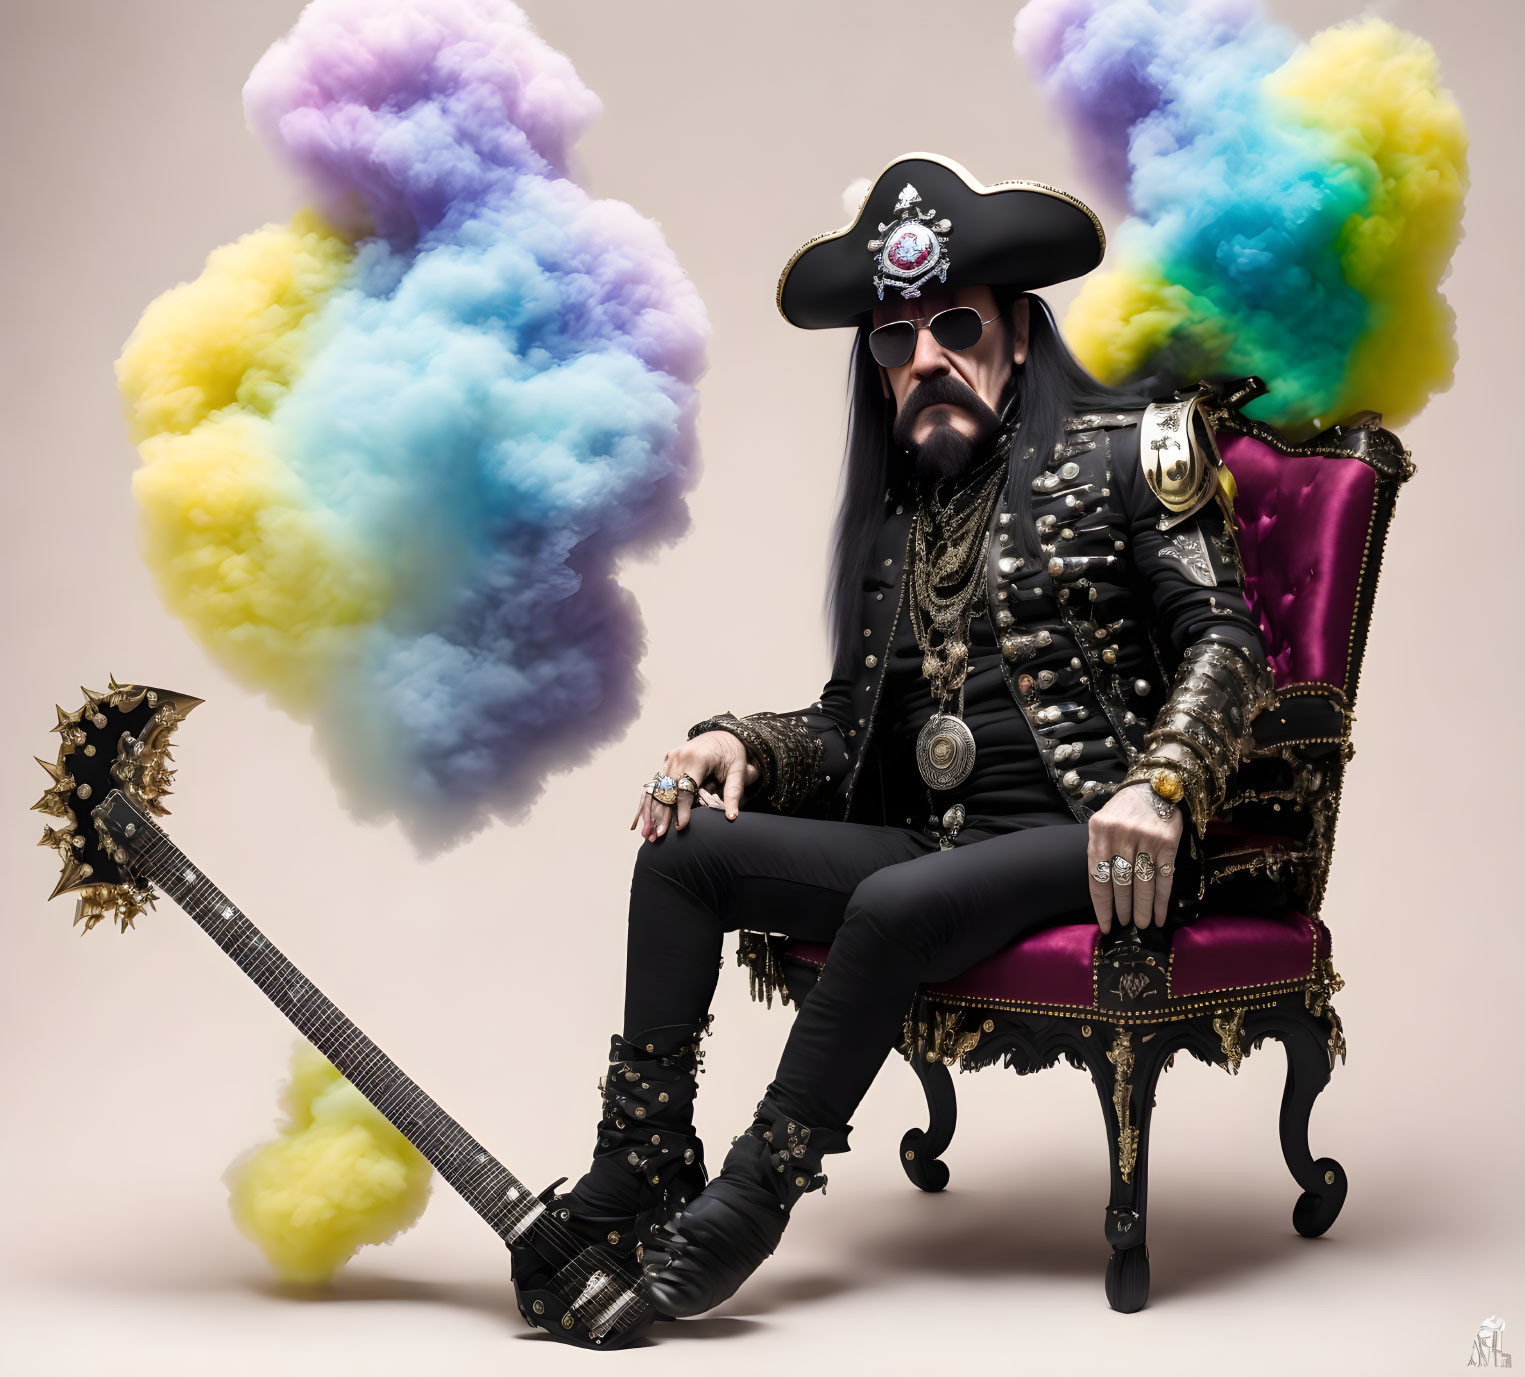 Pirate-metal rocker in ornate chair with spiked mace guitar surrounded by colorful smoke